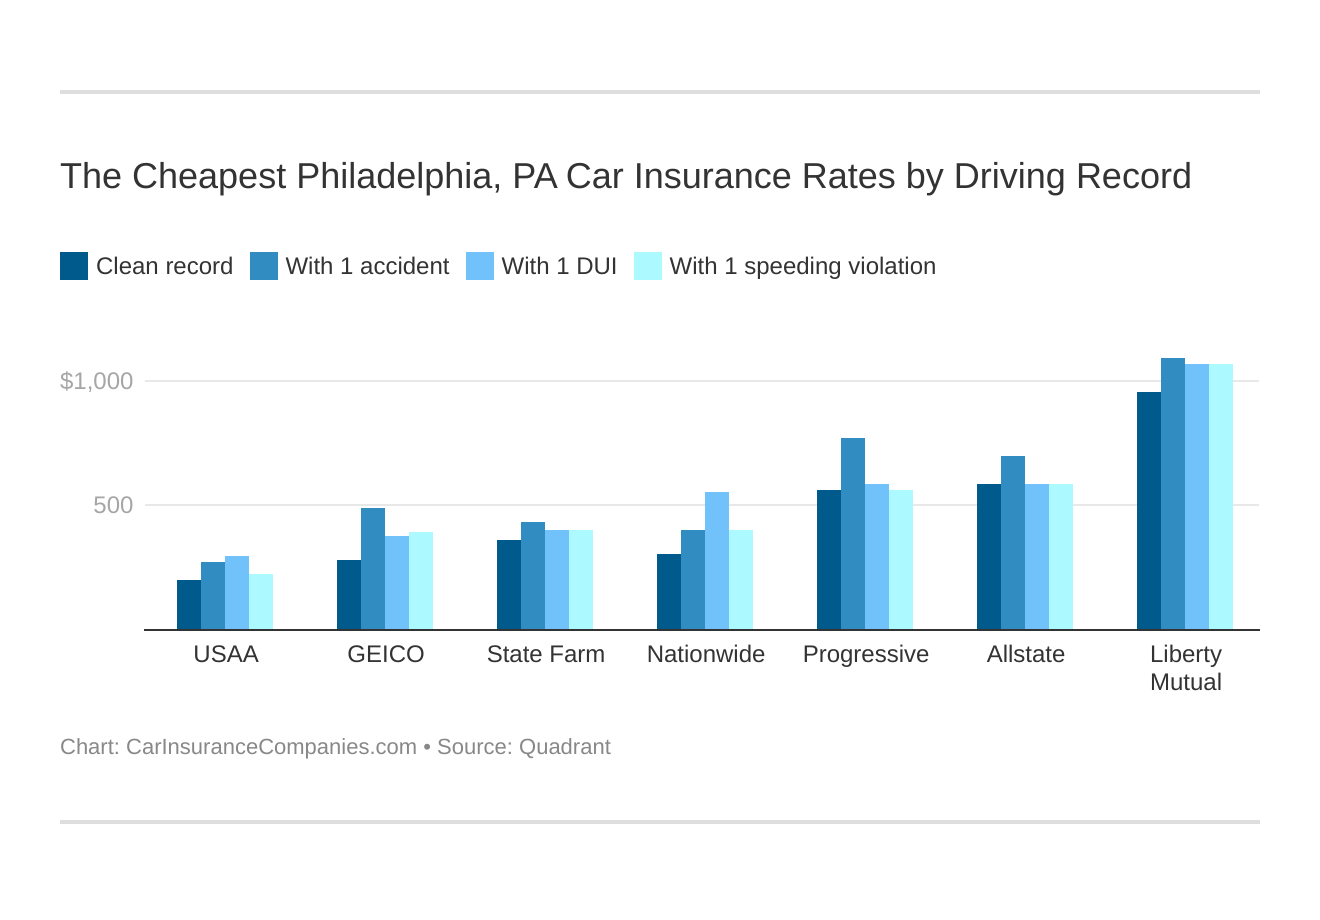 The Cheapest Philadelphia, PA Car Insurance Rates by Driving Record